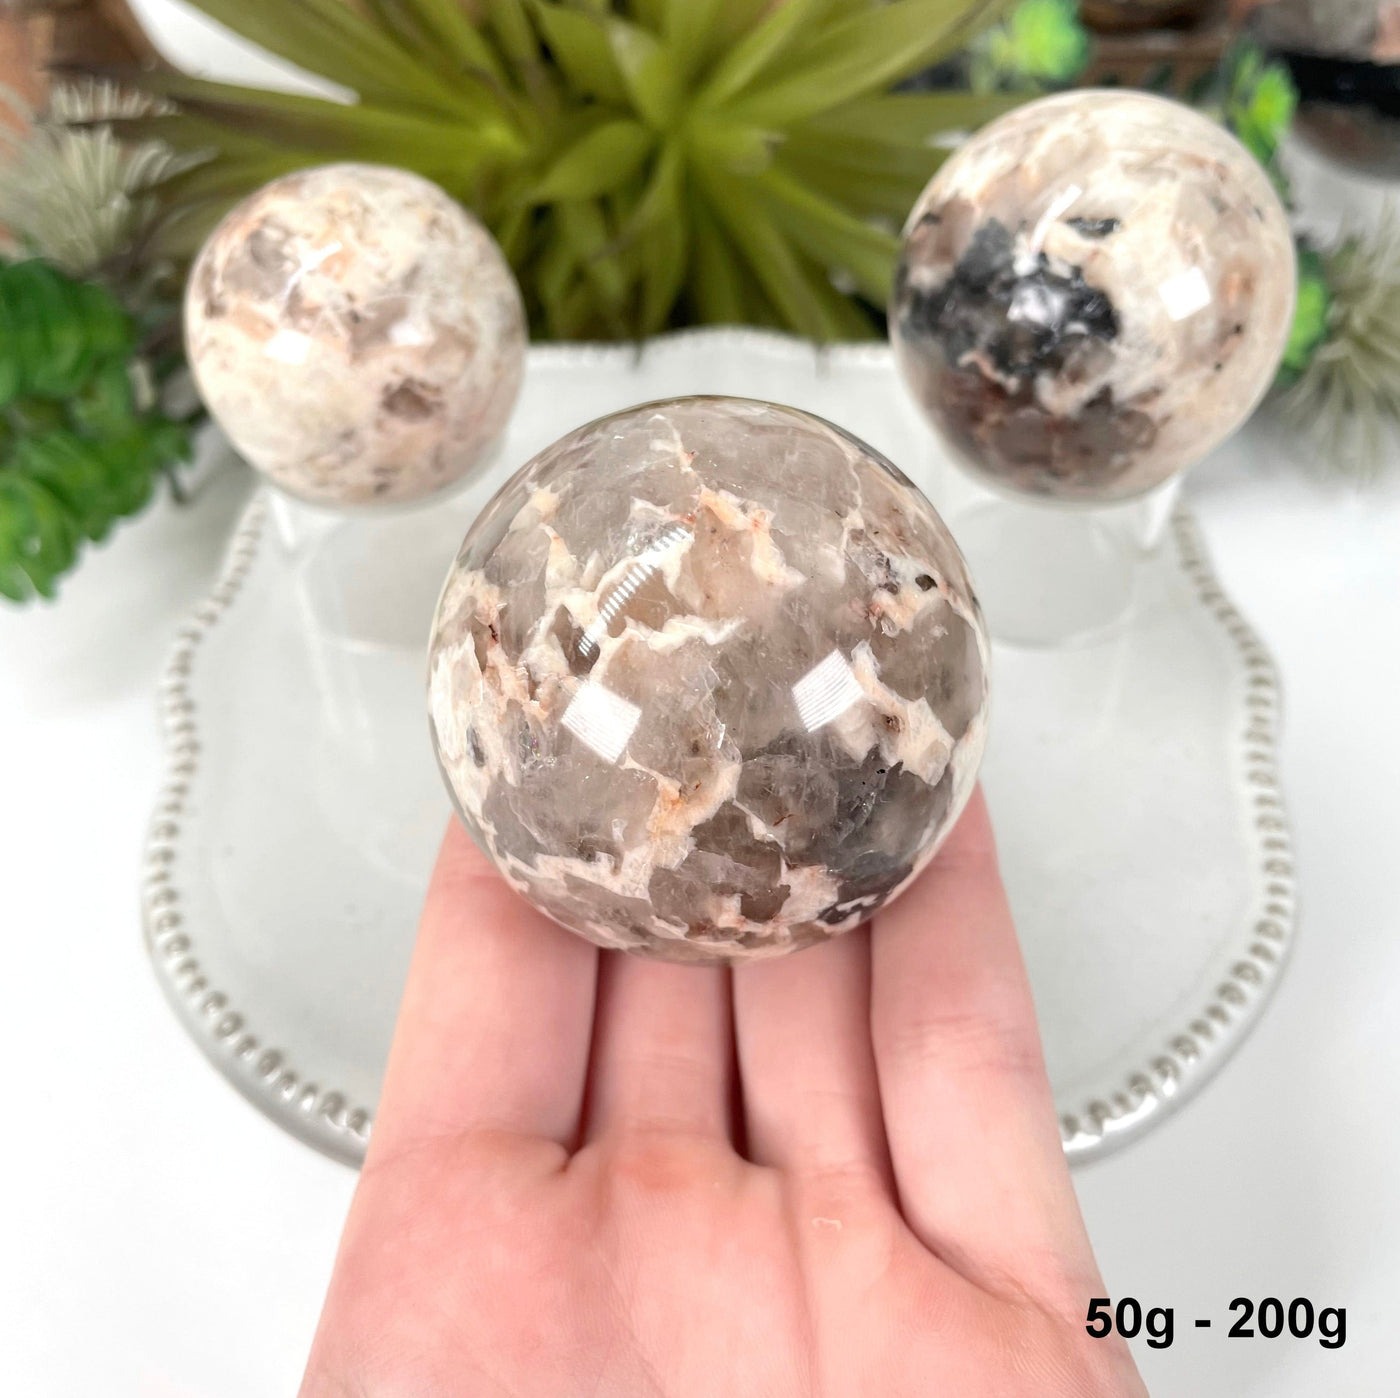 one 50g - 200g sphere in hand for size reference with two others in background display